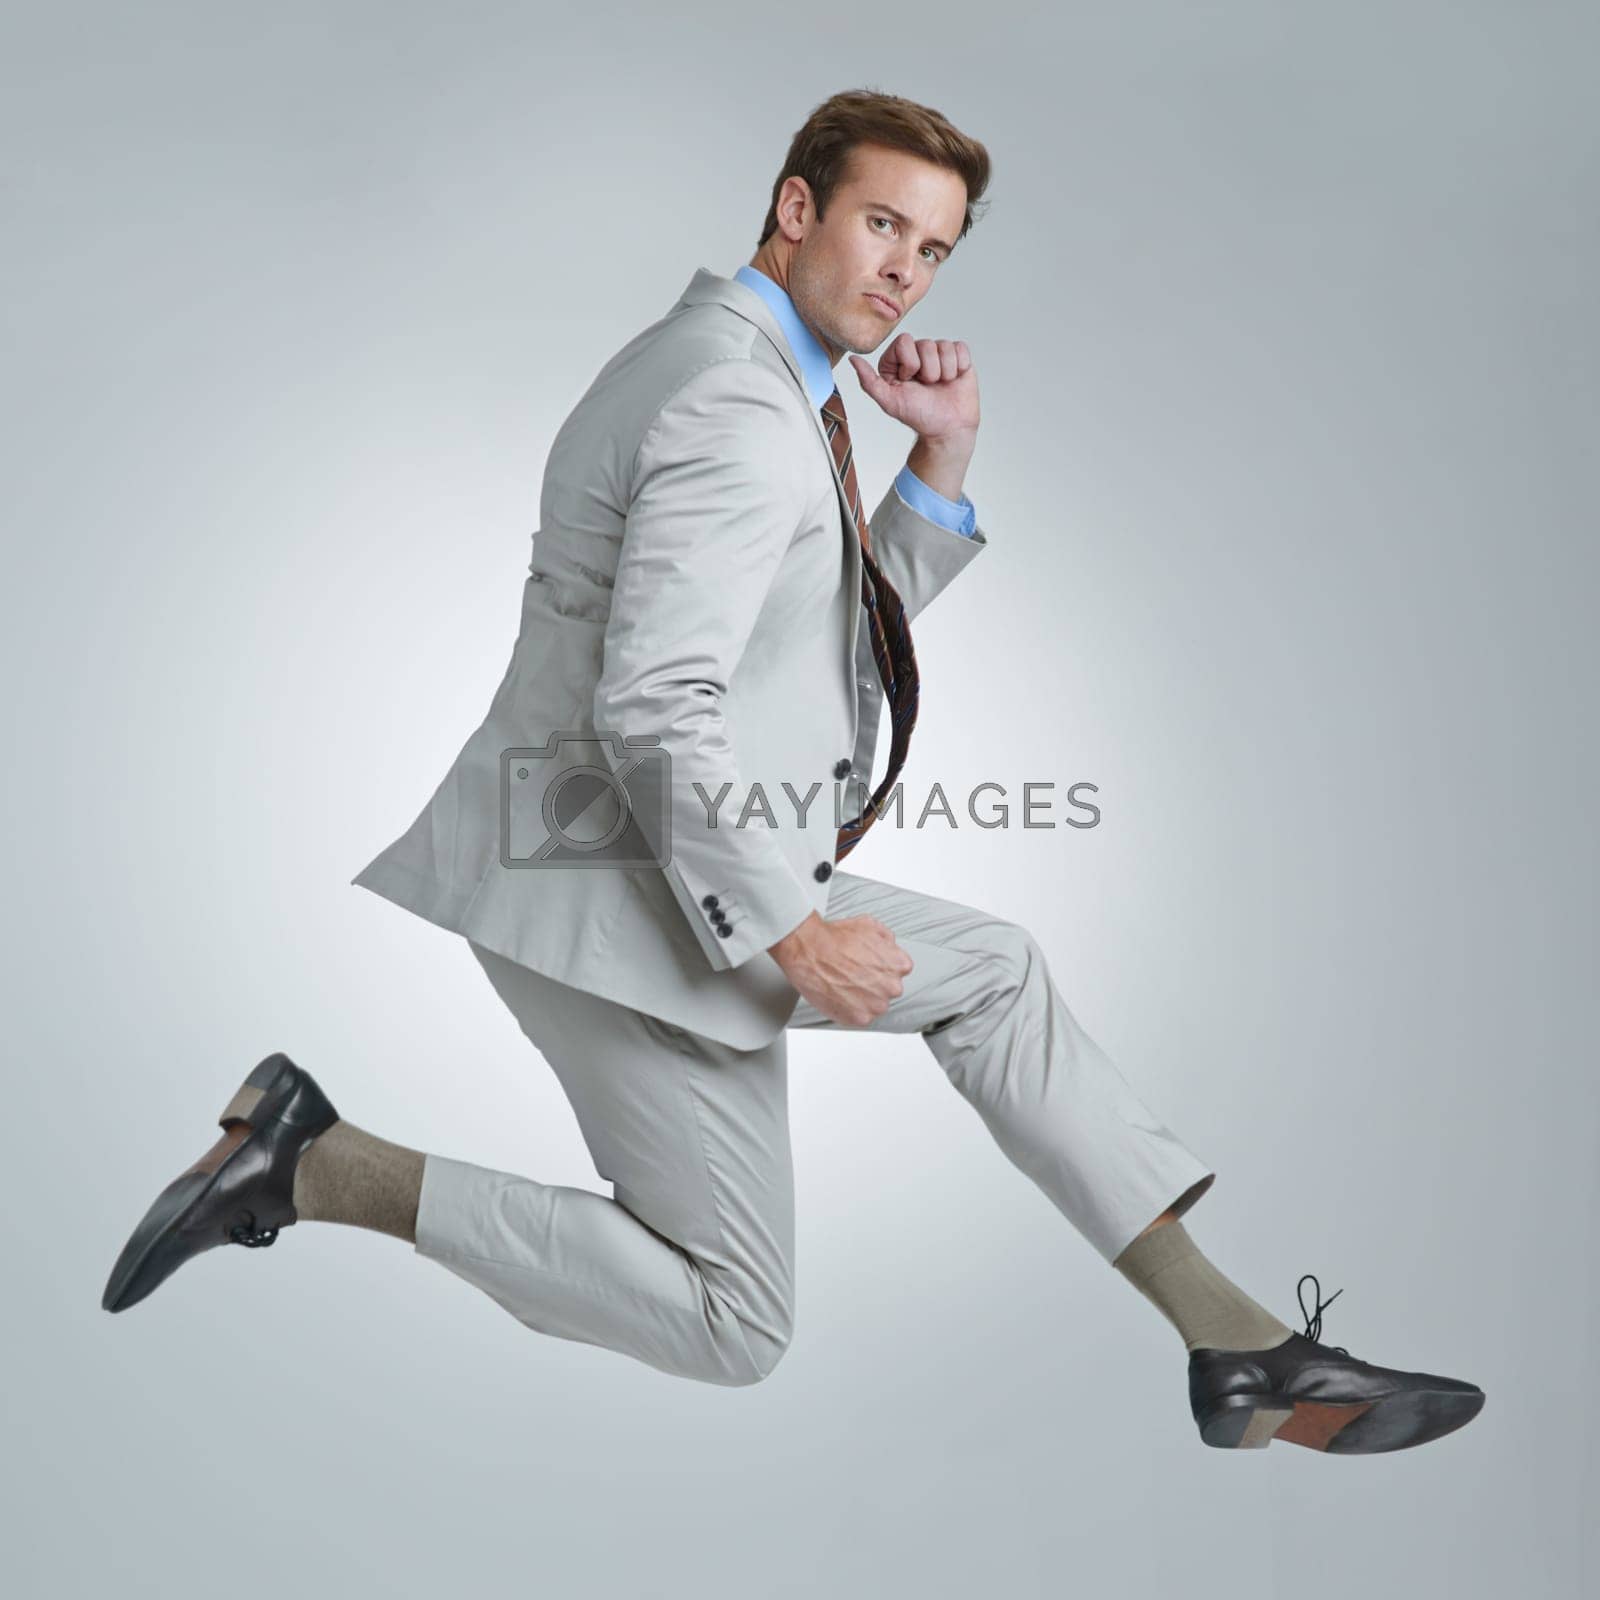 Royalty free image of Business ego. A young businessman wildly celebrating his success. by YuriArcurs